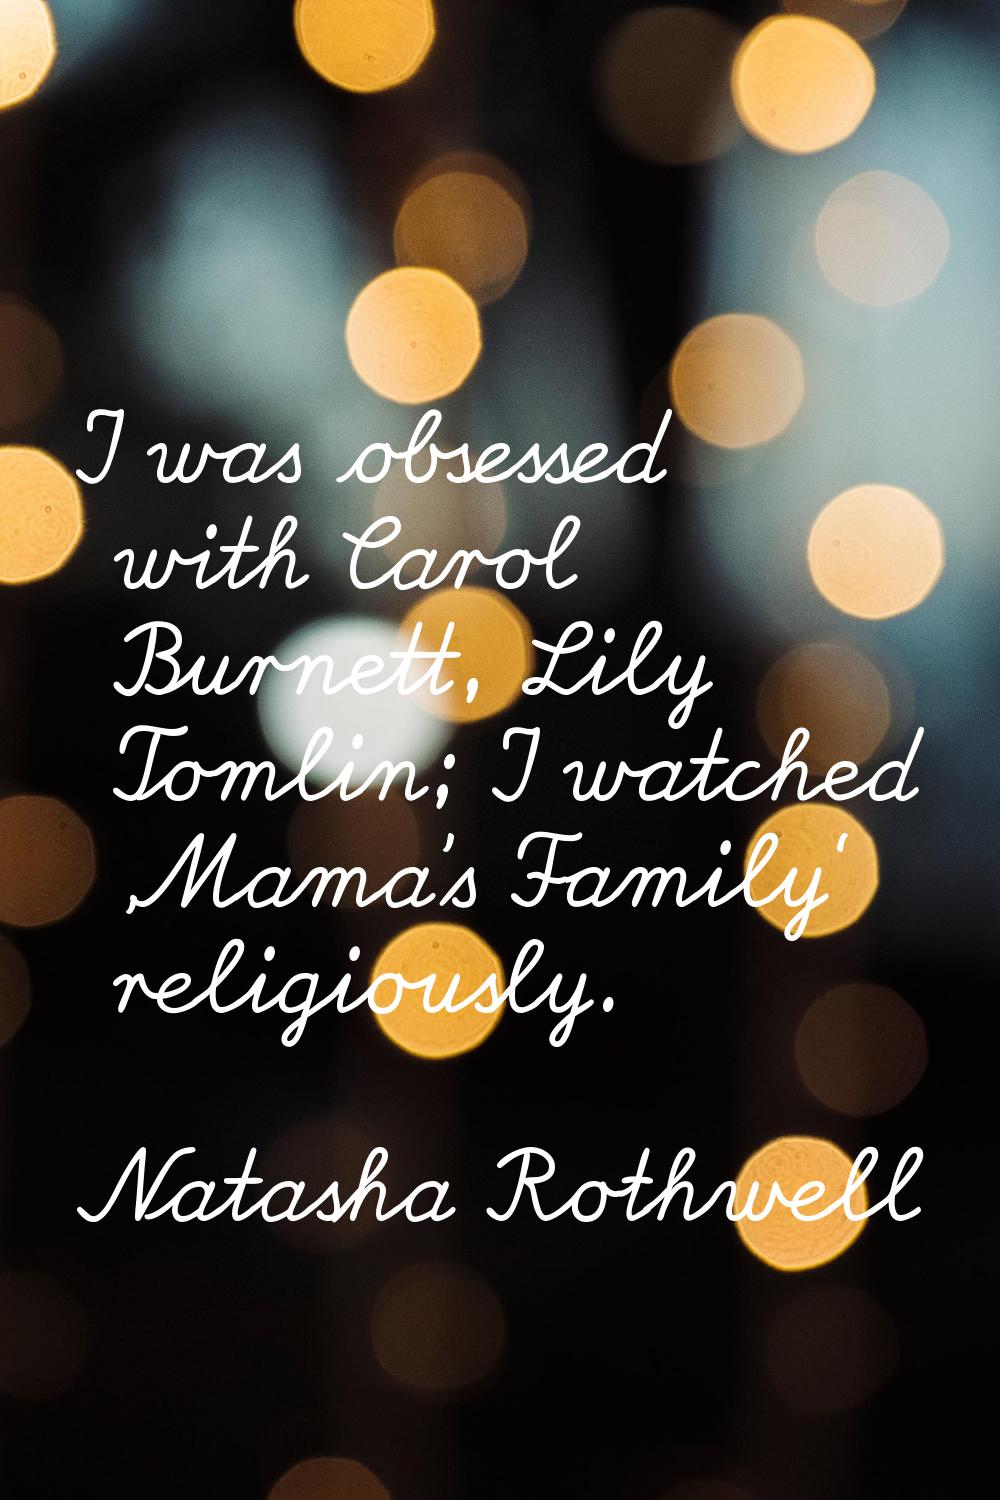 I was obsessed with Carol Burnett, Lily Tomlin; I watched 'Mama's Family' religiously.